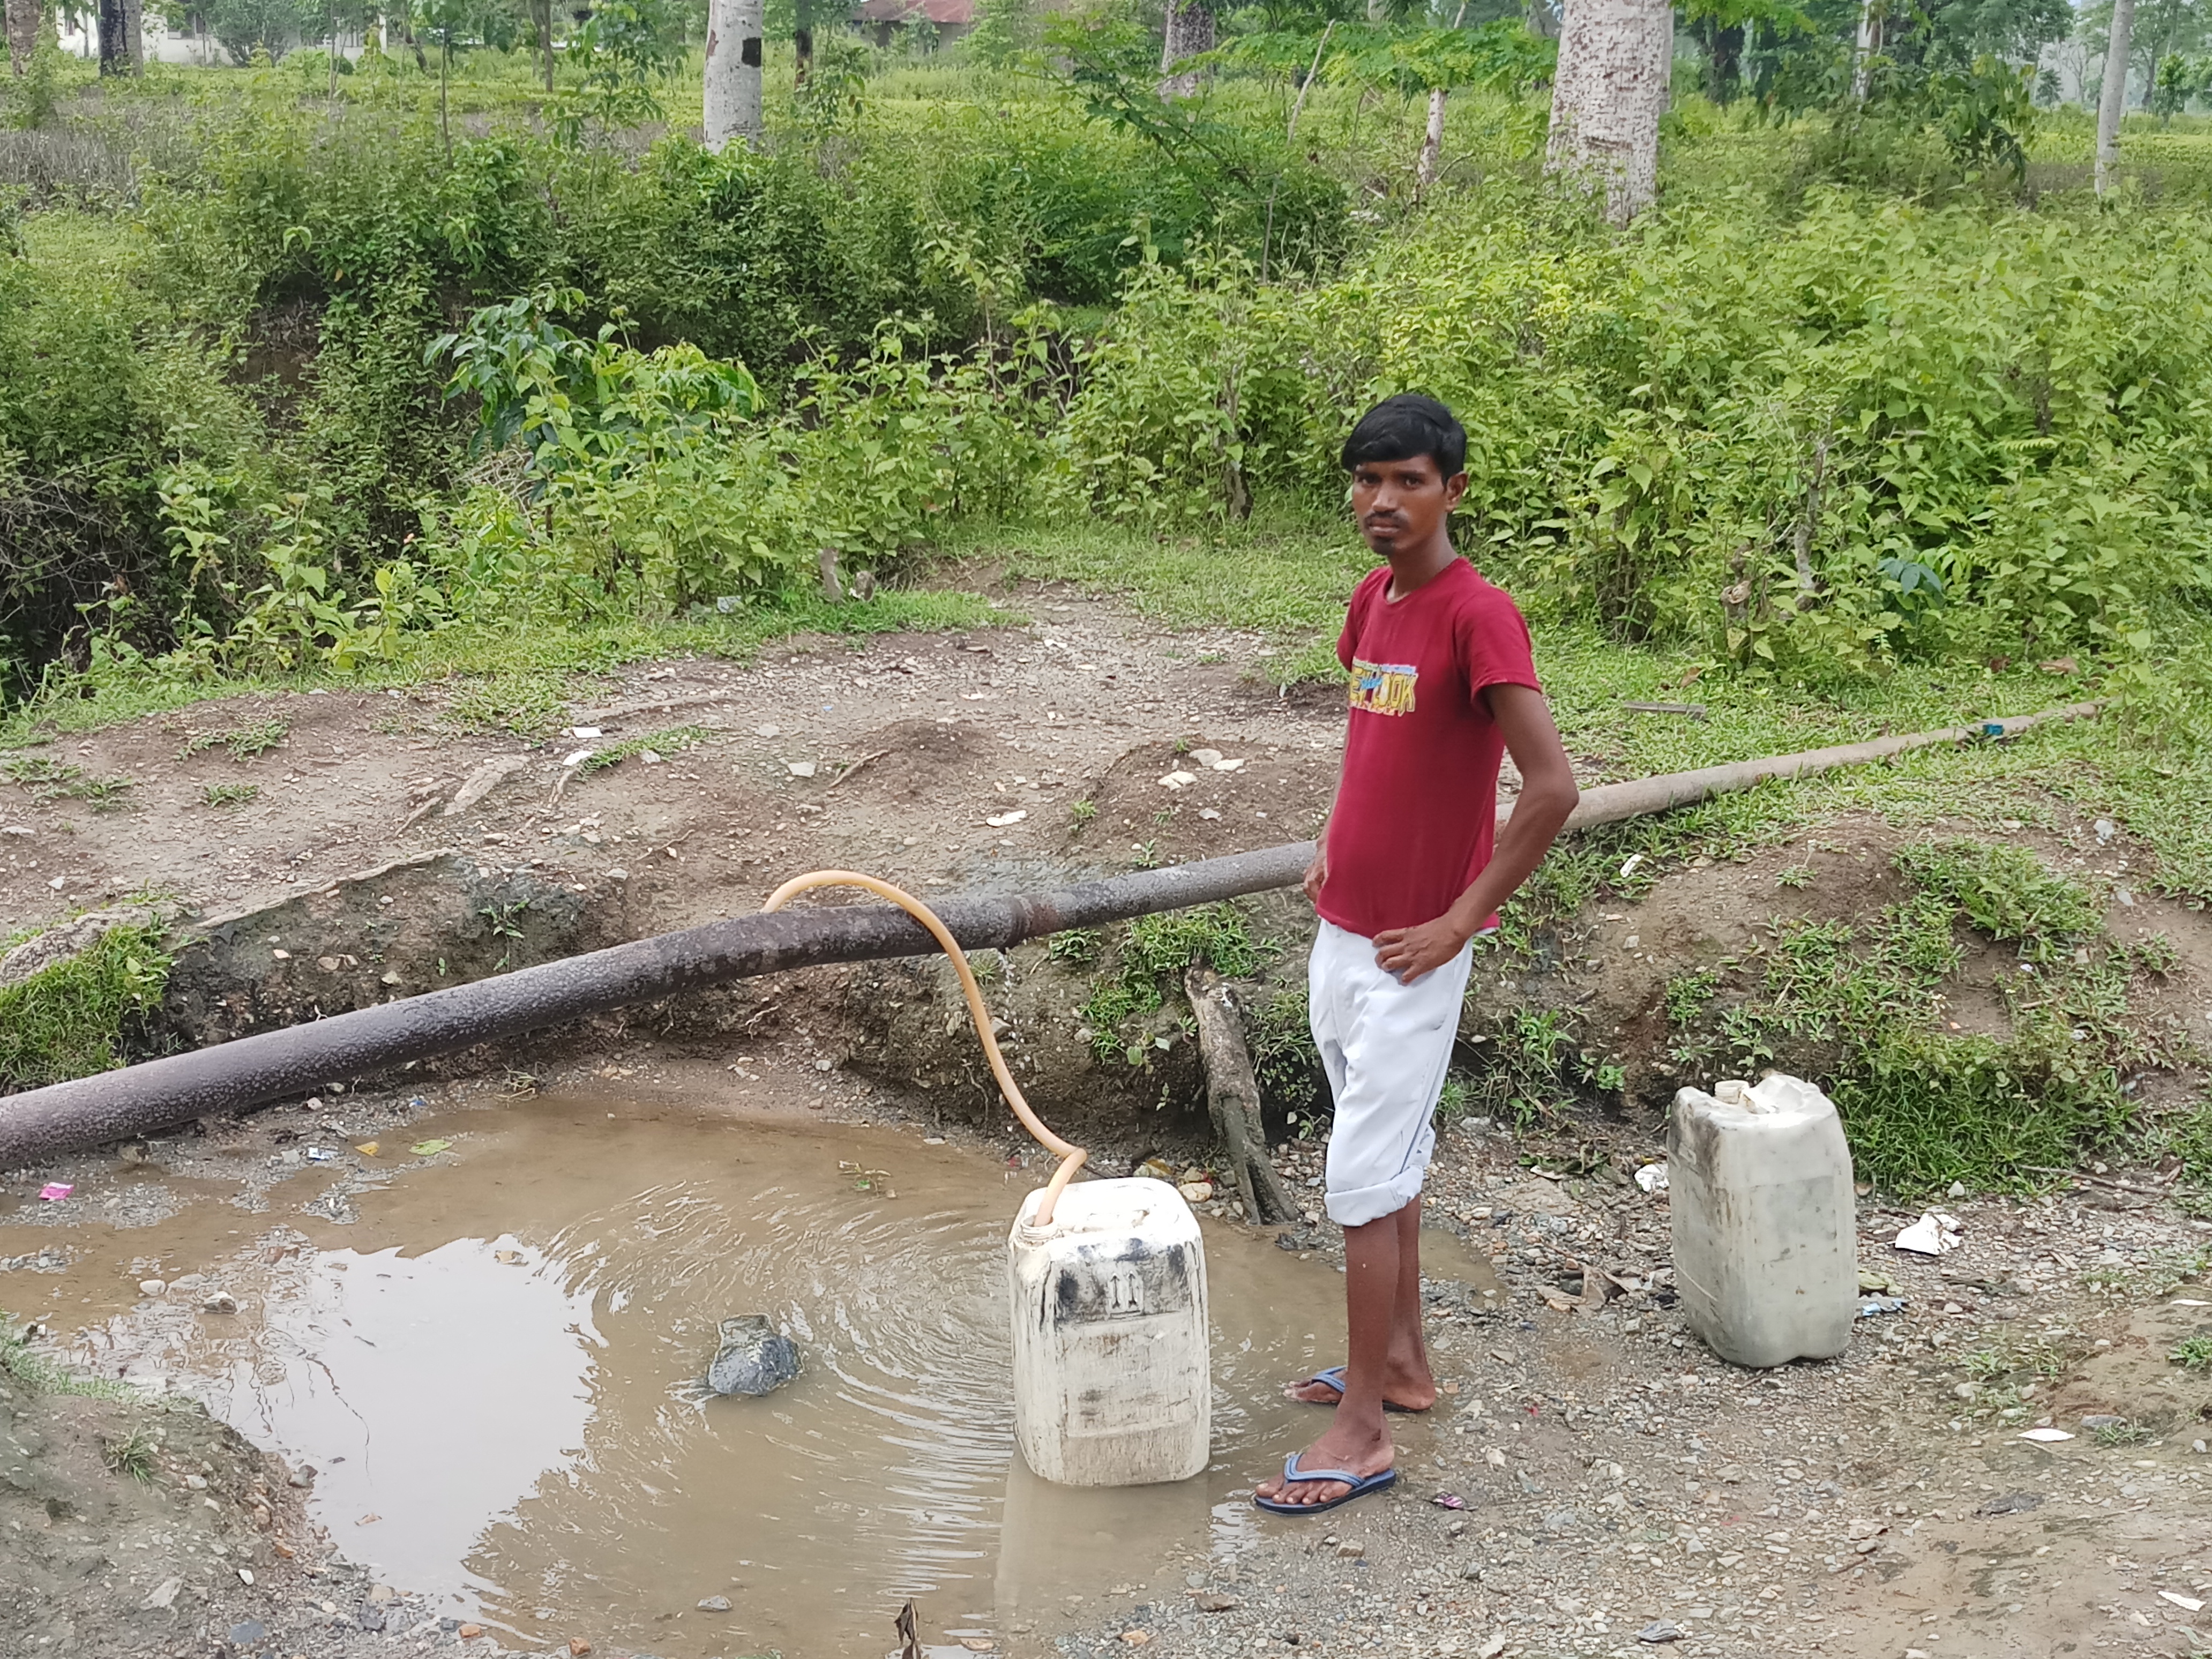 Villagers made a hole in the water pipe from Bhutan so they can take water for their use. (Pic courtesy: Gurvinder Singh)